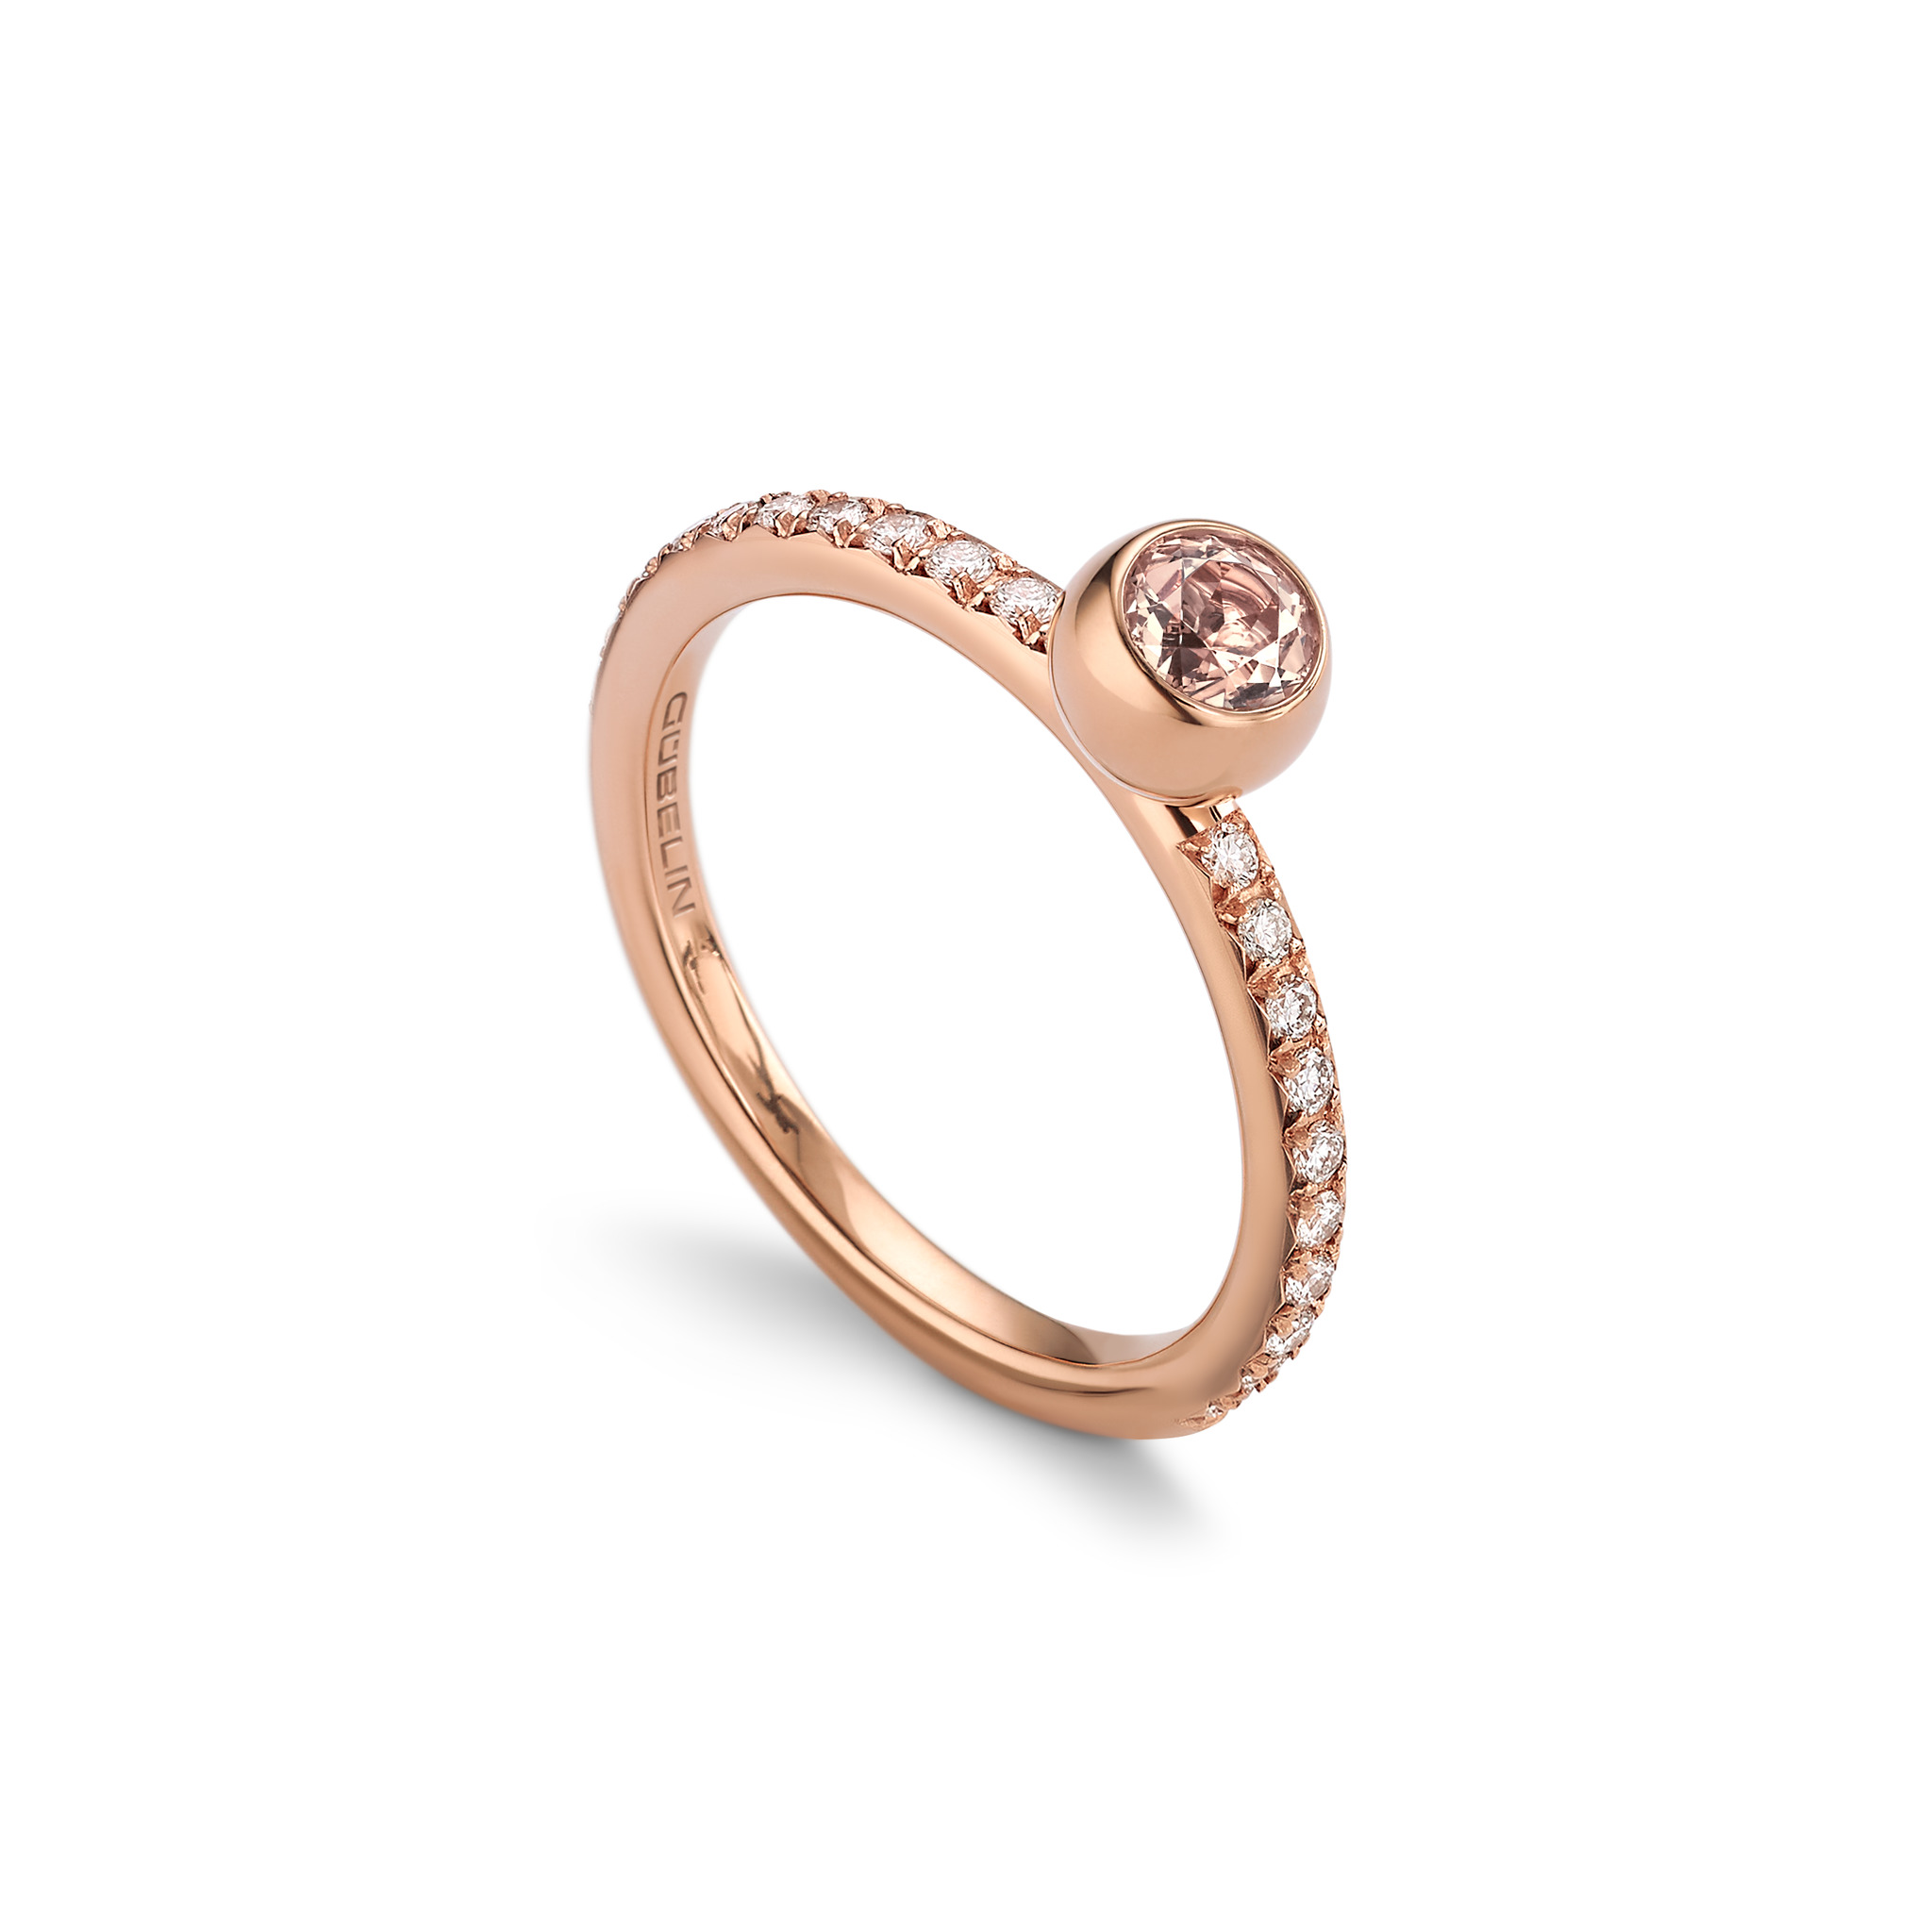 Ring with morganite